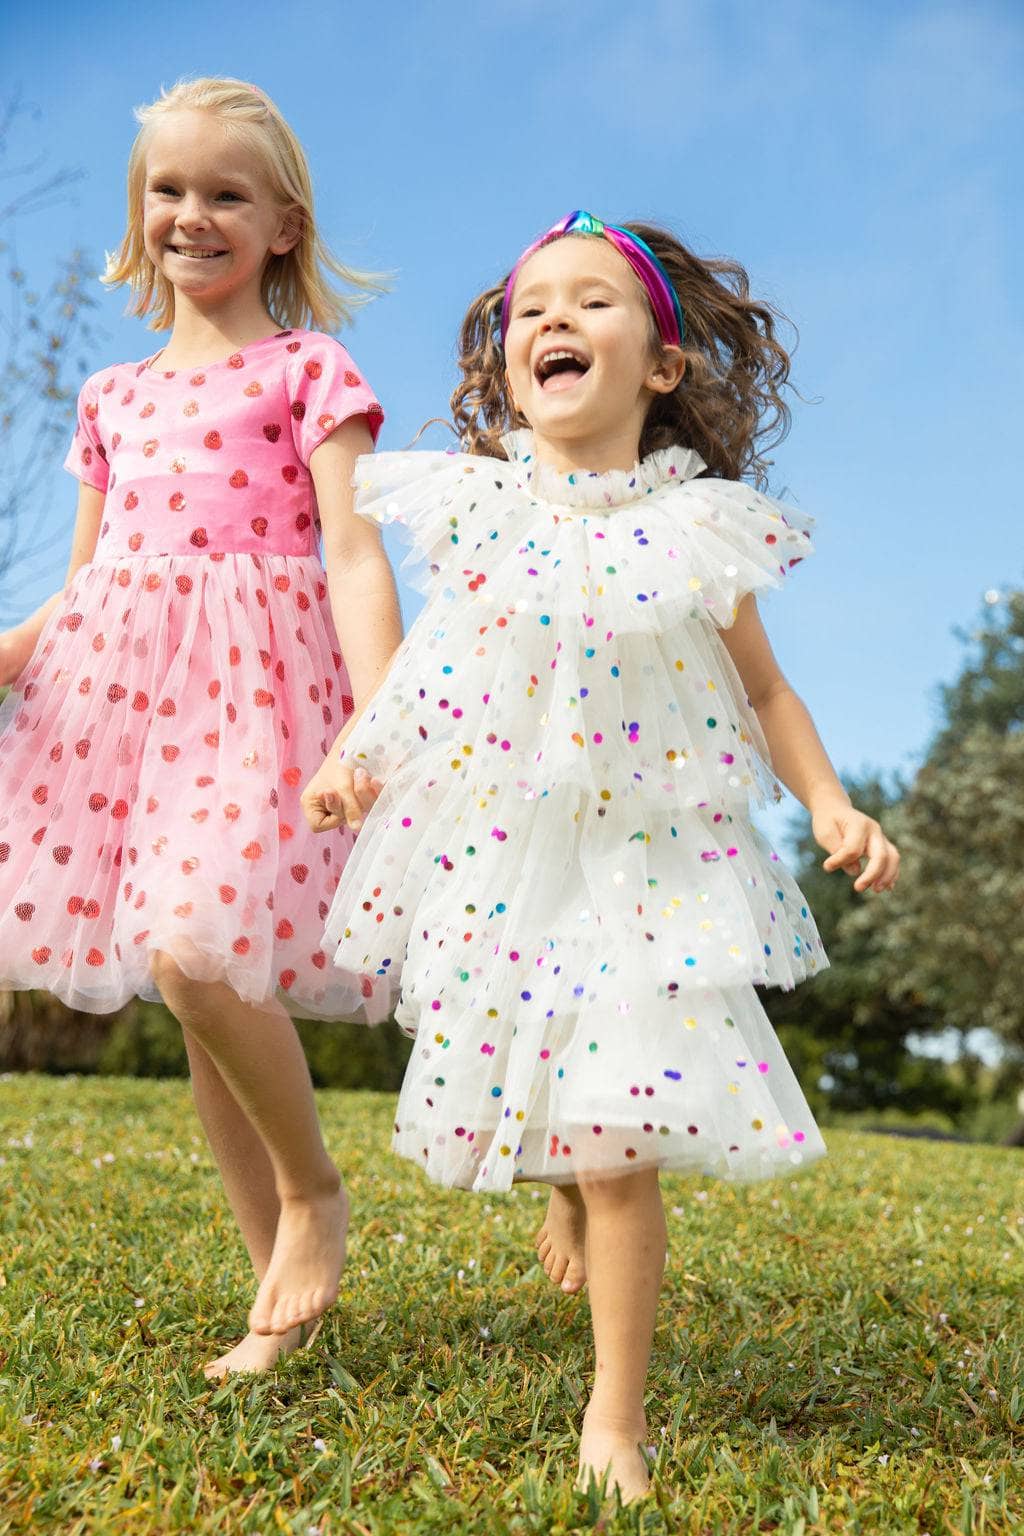 Milkyway Girls Trendy Fashion Knee Length Polka dot Dress (6-7 Years,  Black) : Amazon.in: Clothing & Accessories